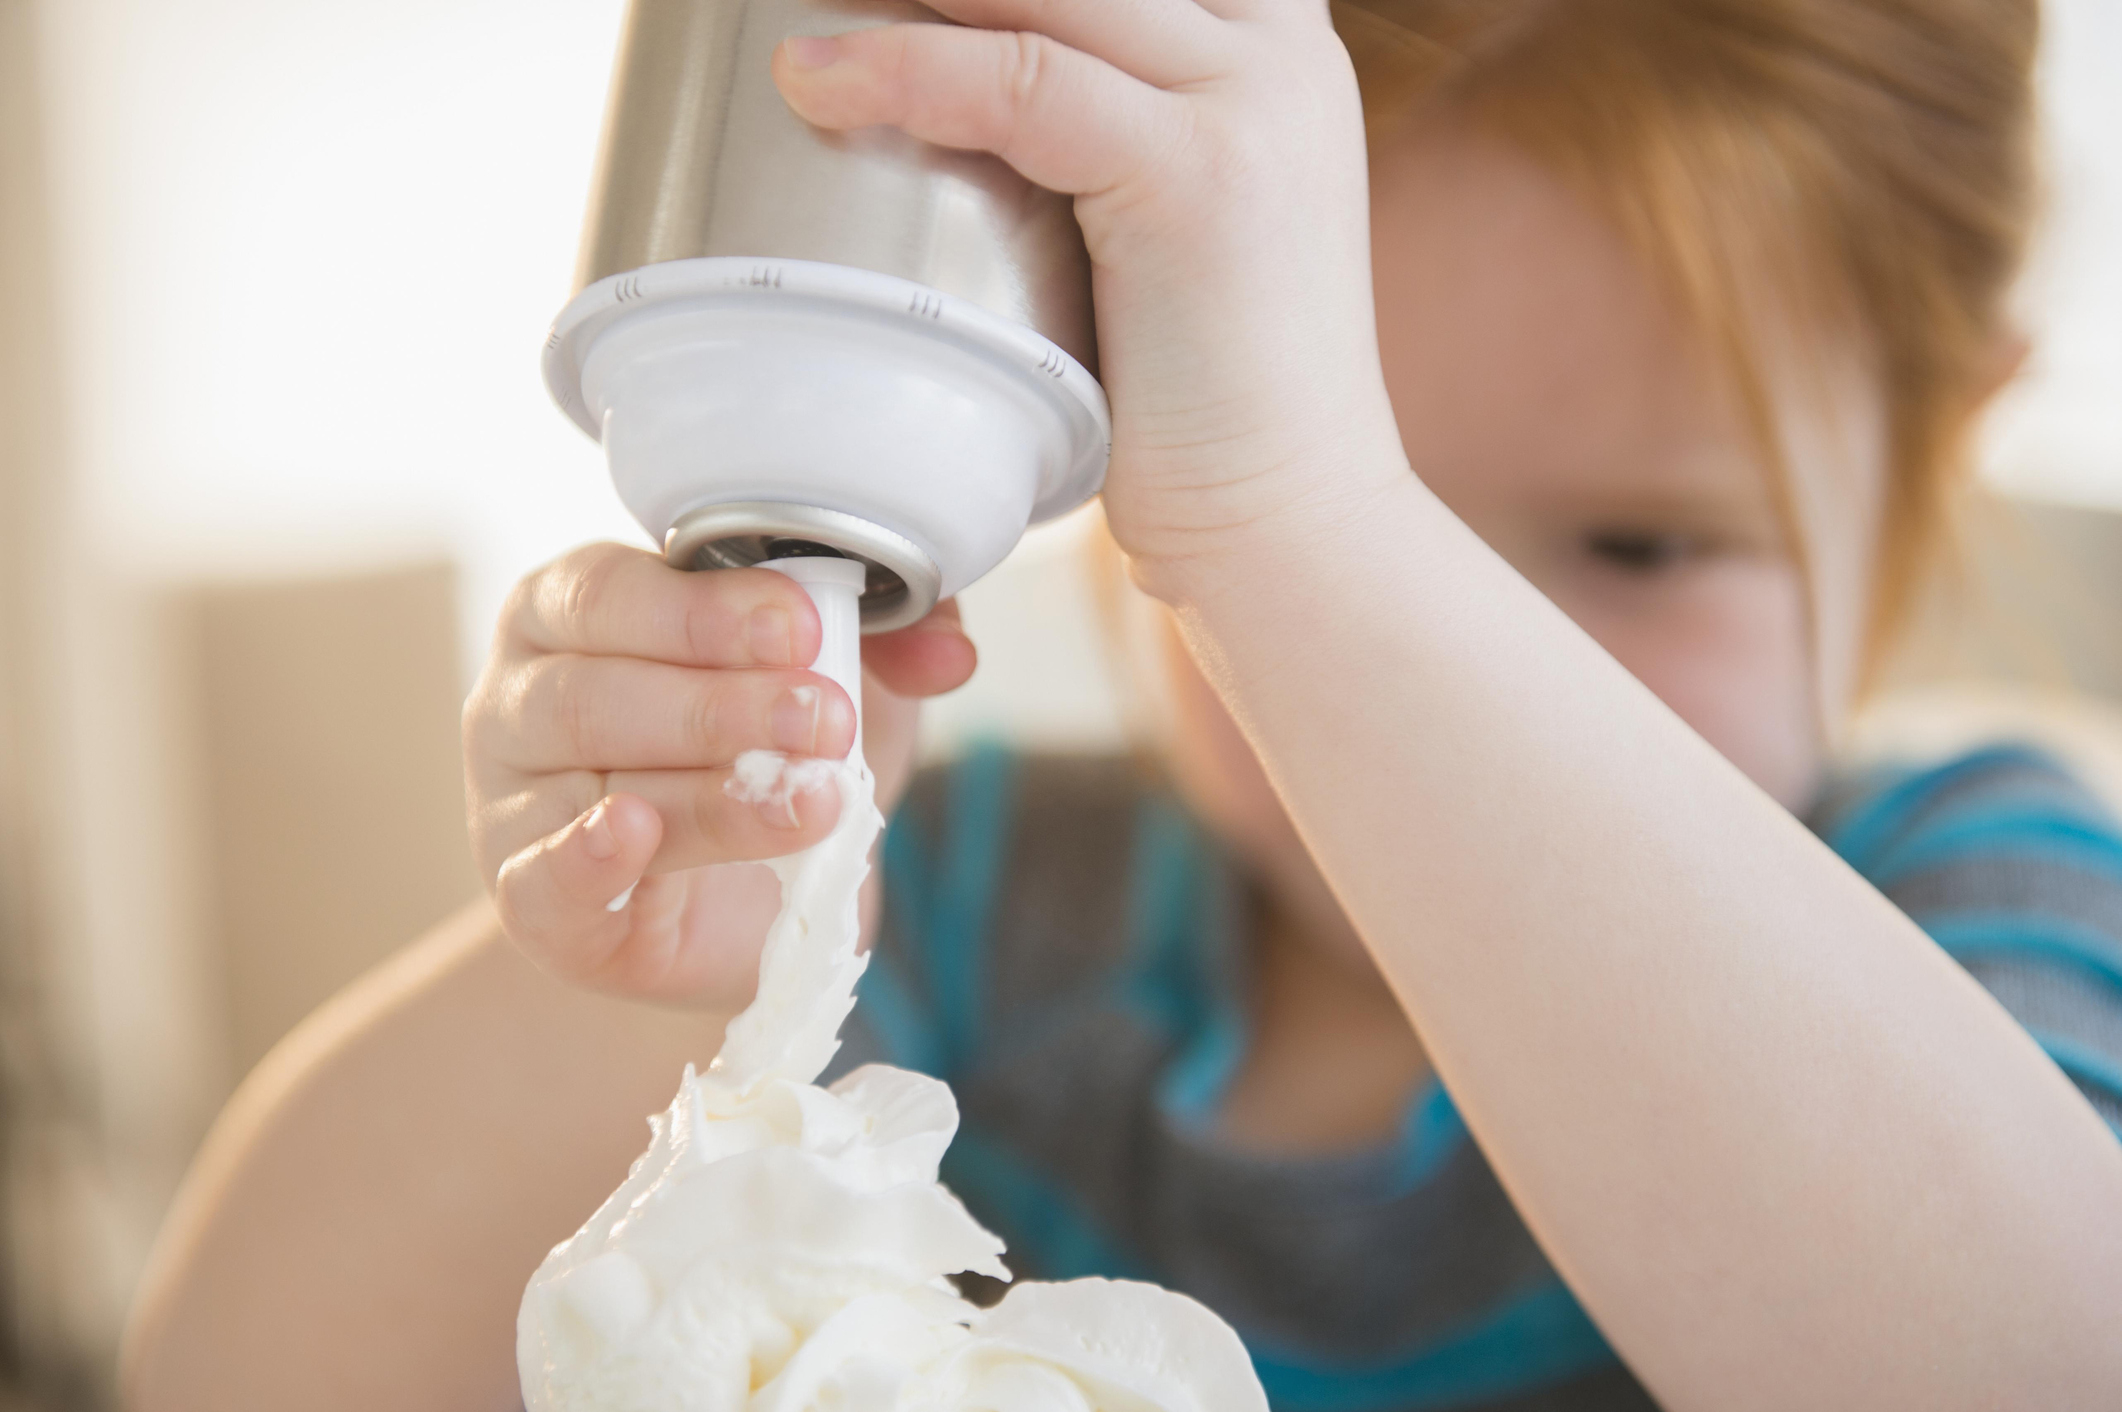 A child spraying whipped cream out of a can